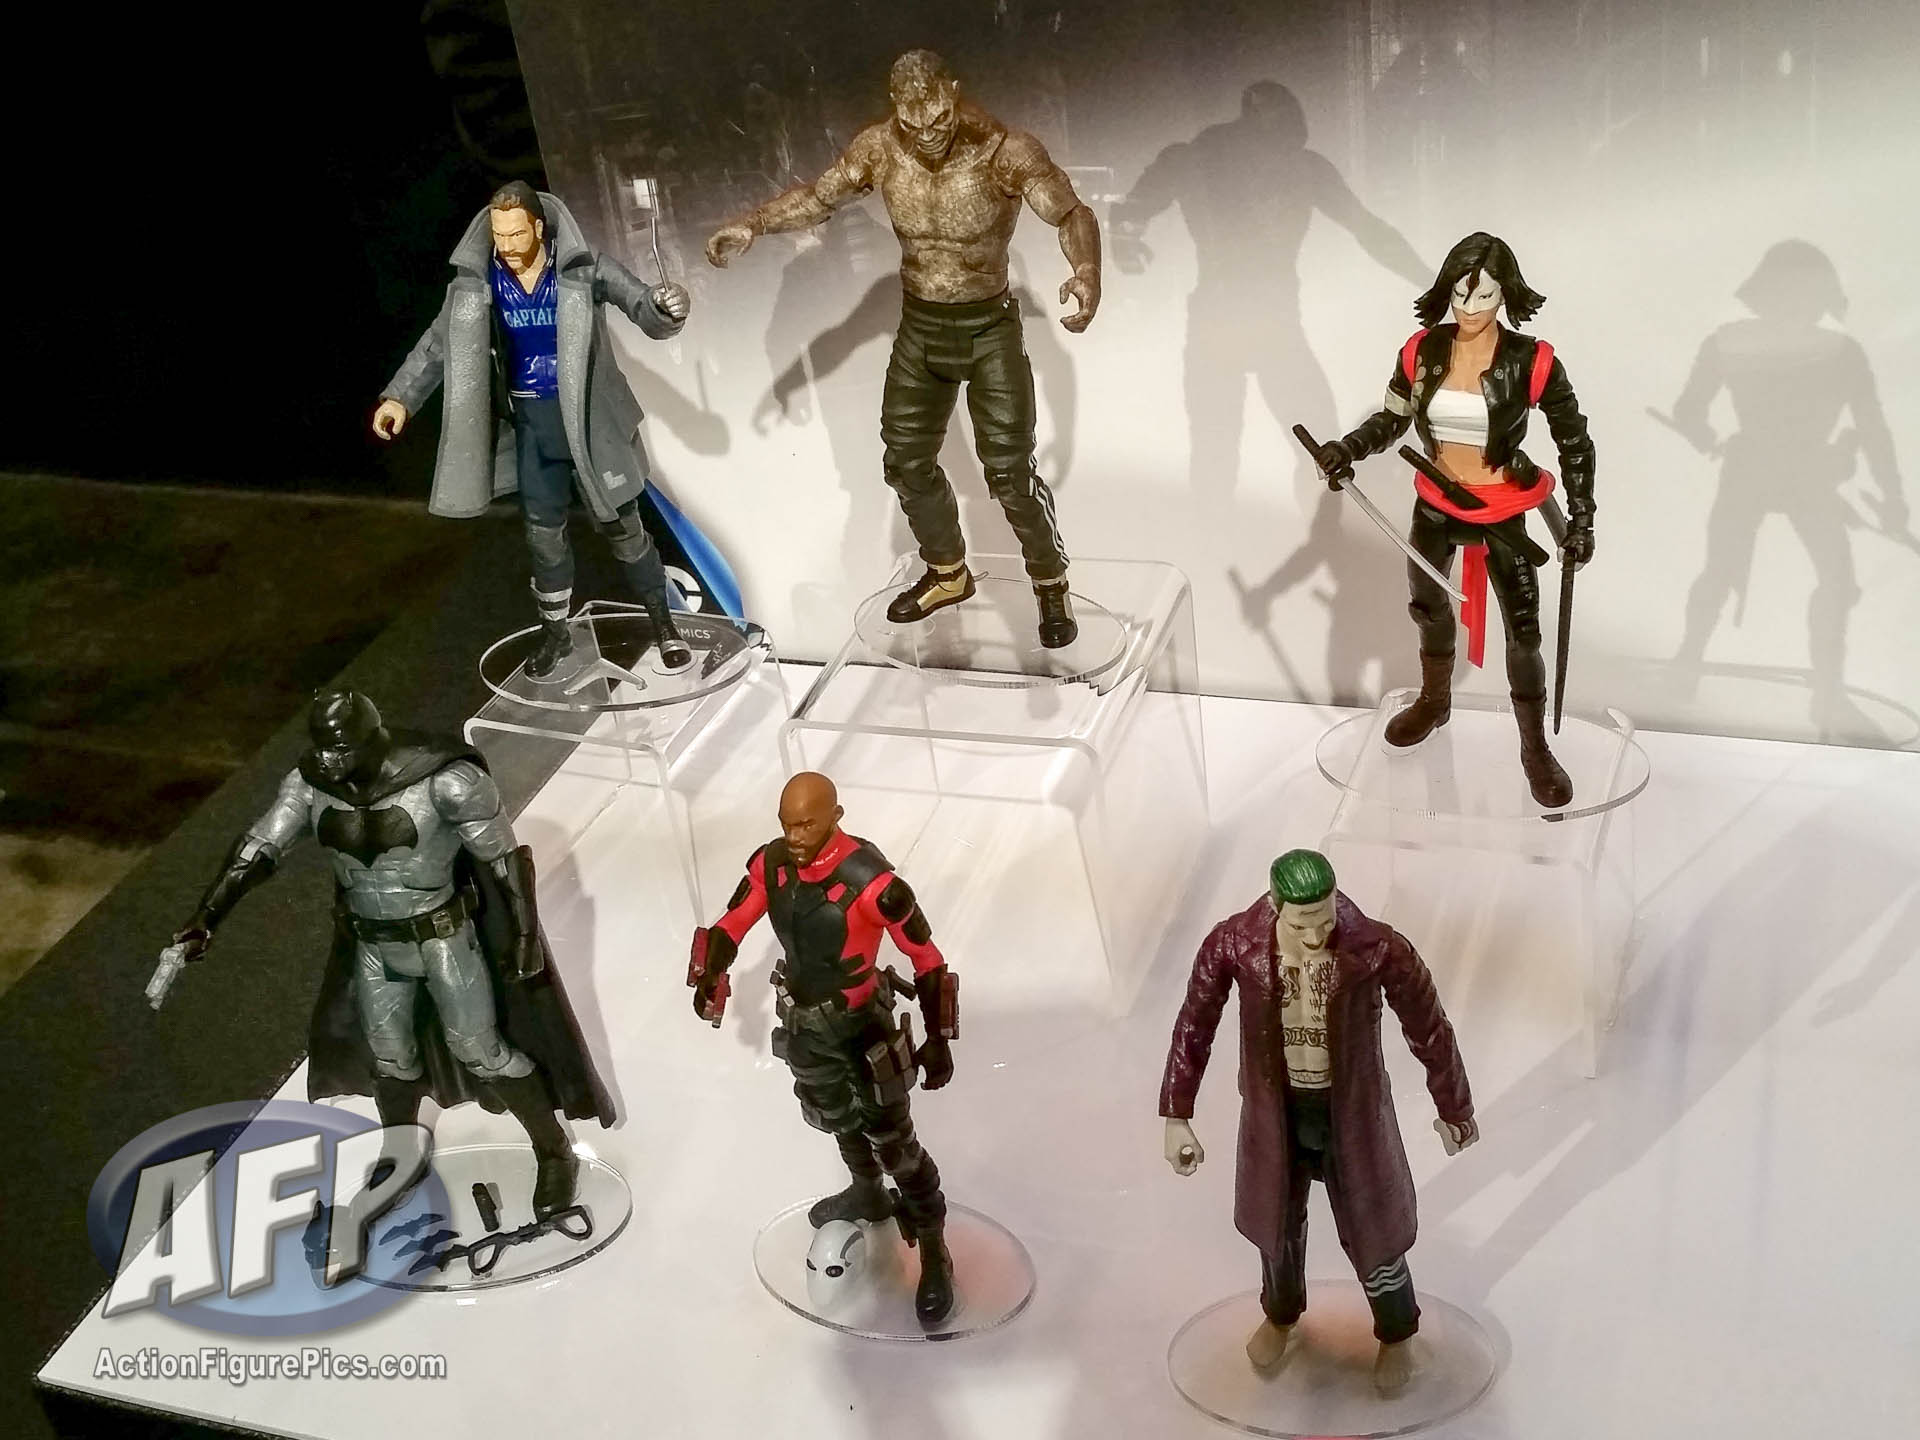 Mattel DC Comics Multiverse - Джокер dkn39. Suicide Squad 2016 Toys. Игрушки Маттел Рыцари. Игрушки Маттел 2016 год кровать. Коды multiverse defenders